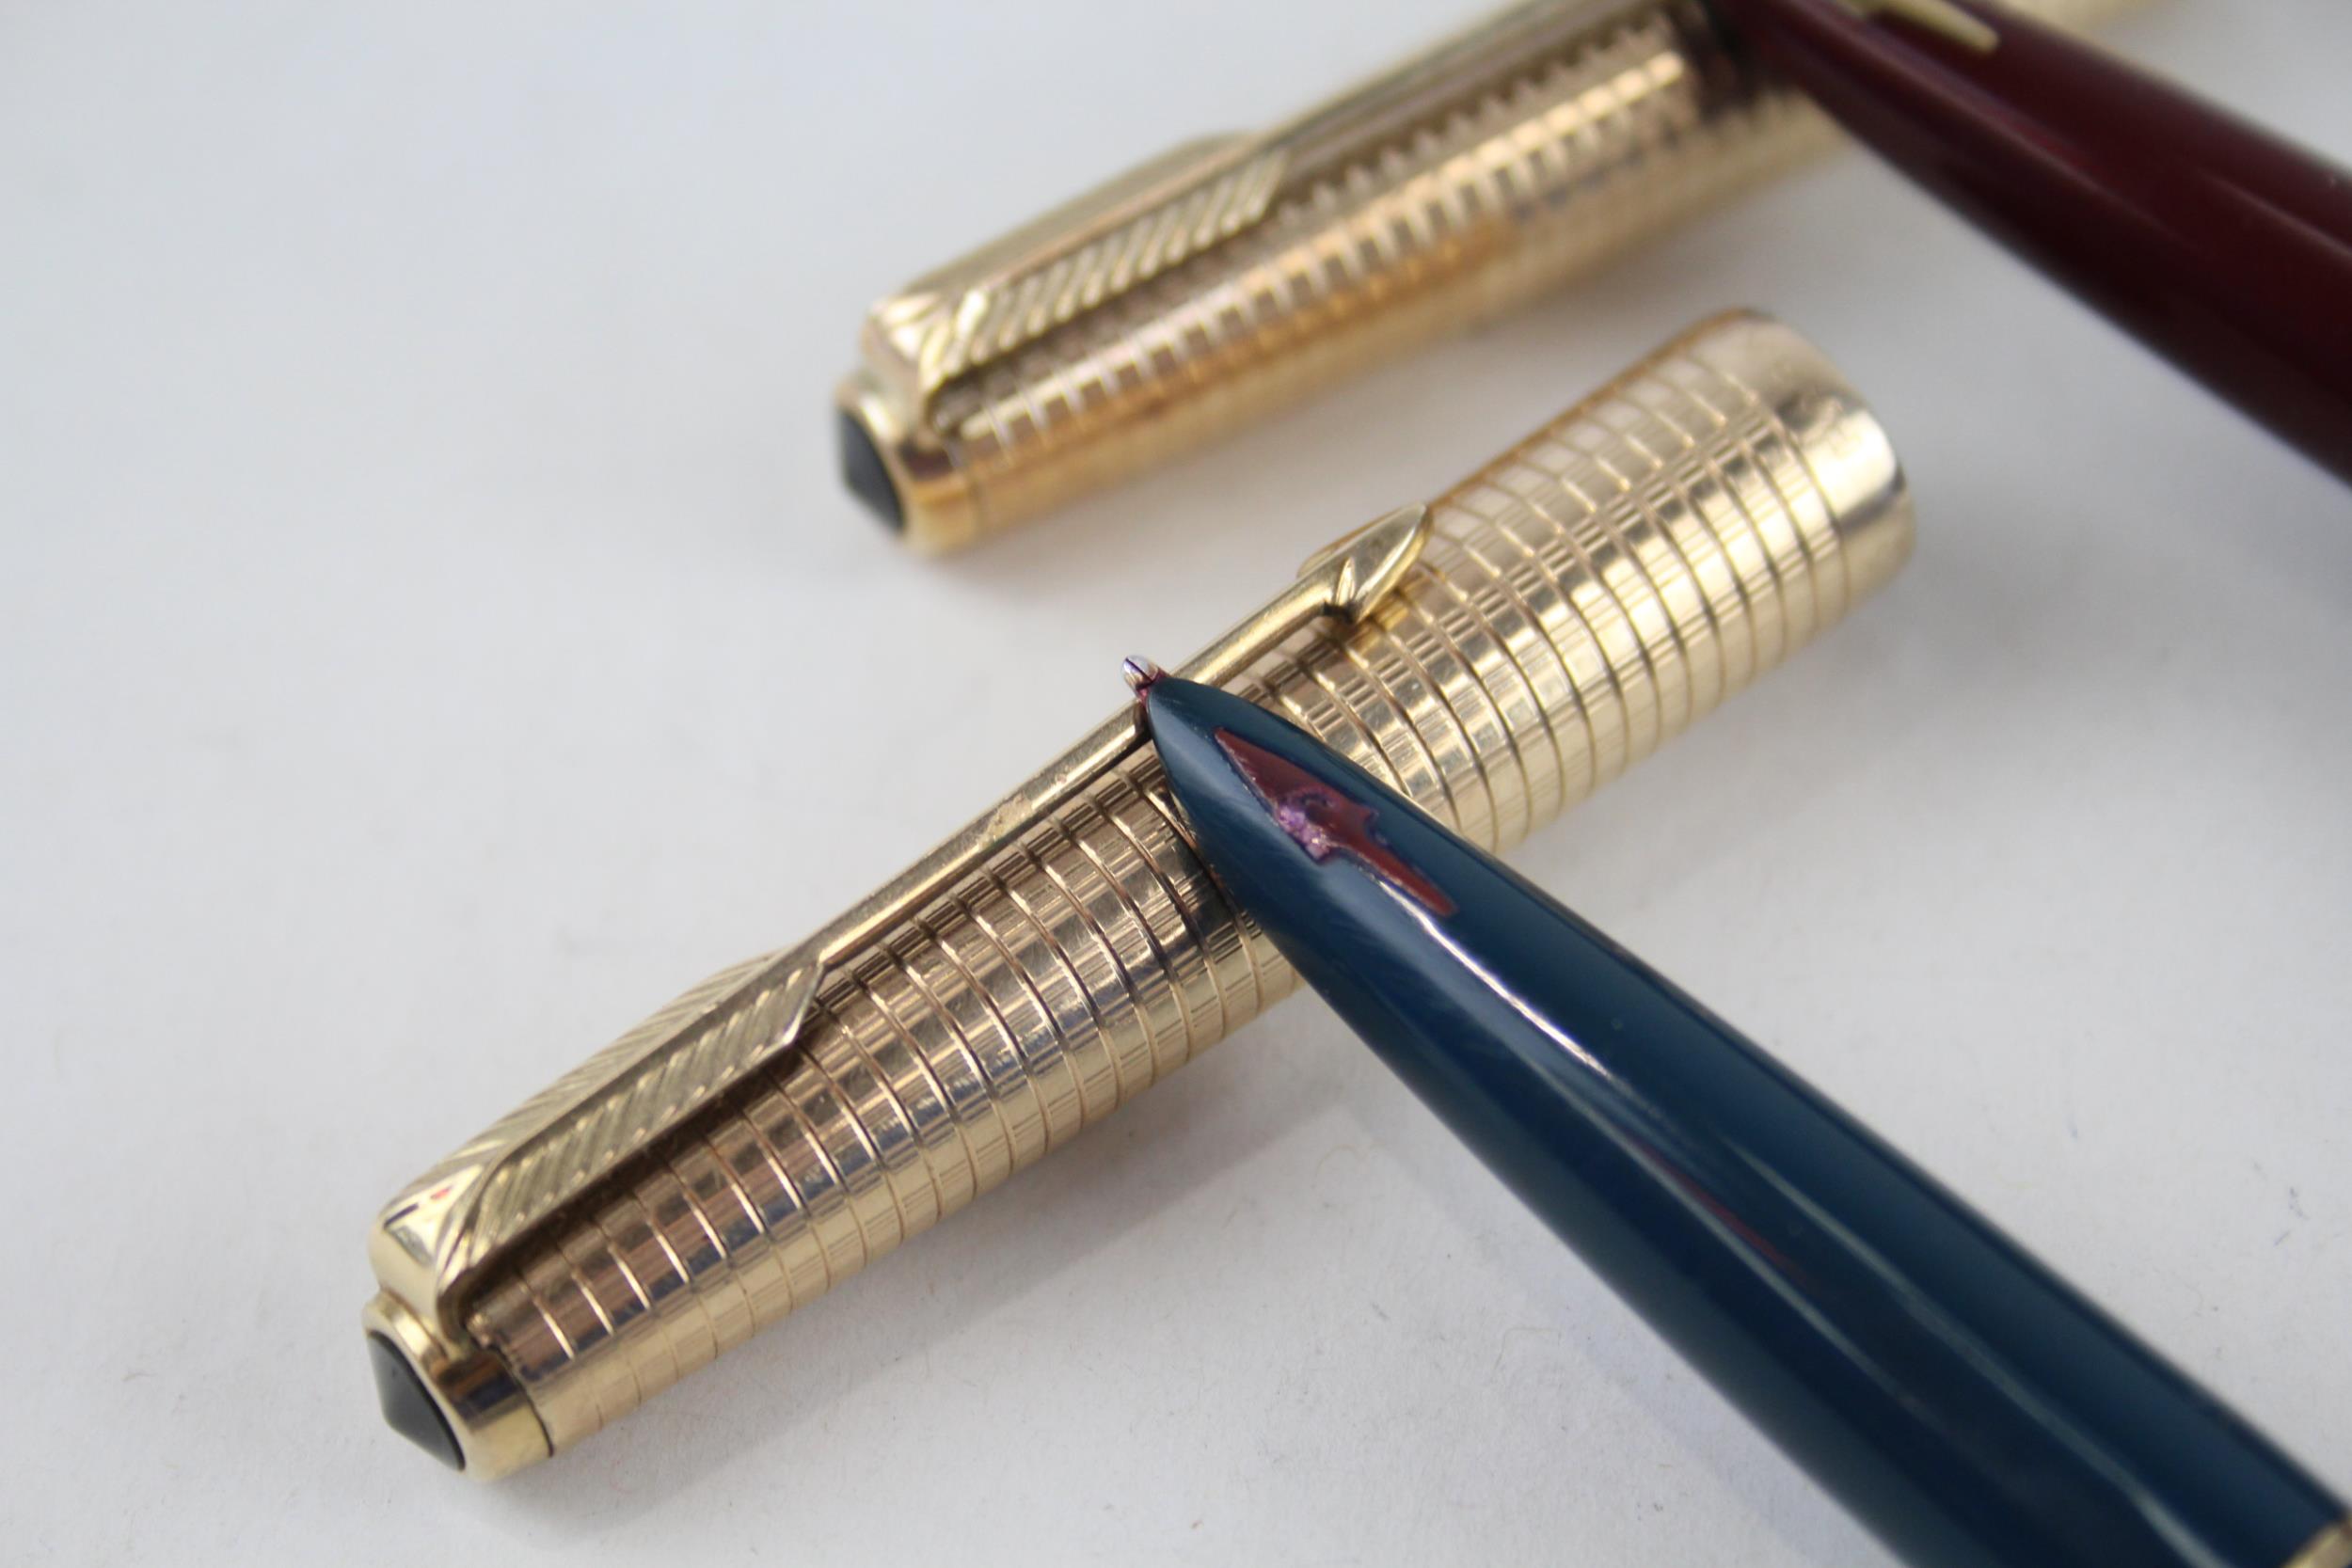 2 x Vintage PARKER 61 Fountain Pens w/ 14ct Gold Nibs, Rolled Gold Caps Etc - Dip Tested & WRITING - Image 3 of 5